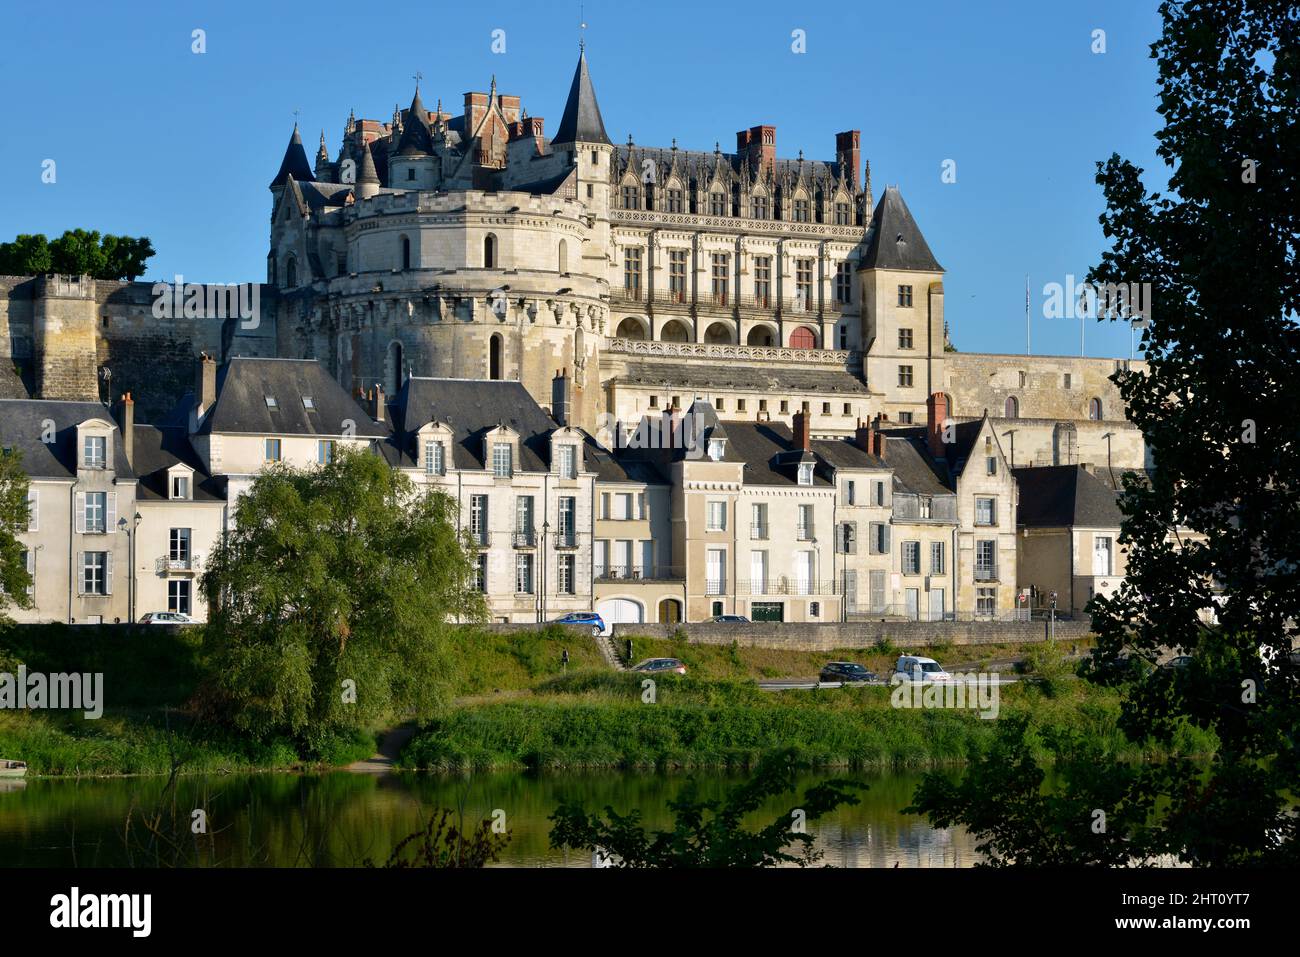 Magnificent castle very famous of Amboise, a commune in the Indre-et-Loire department in central France. Stock Photo